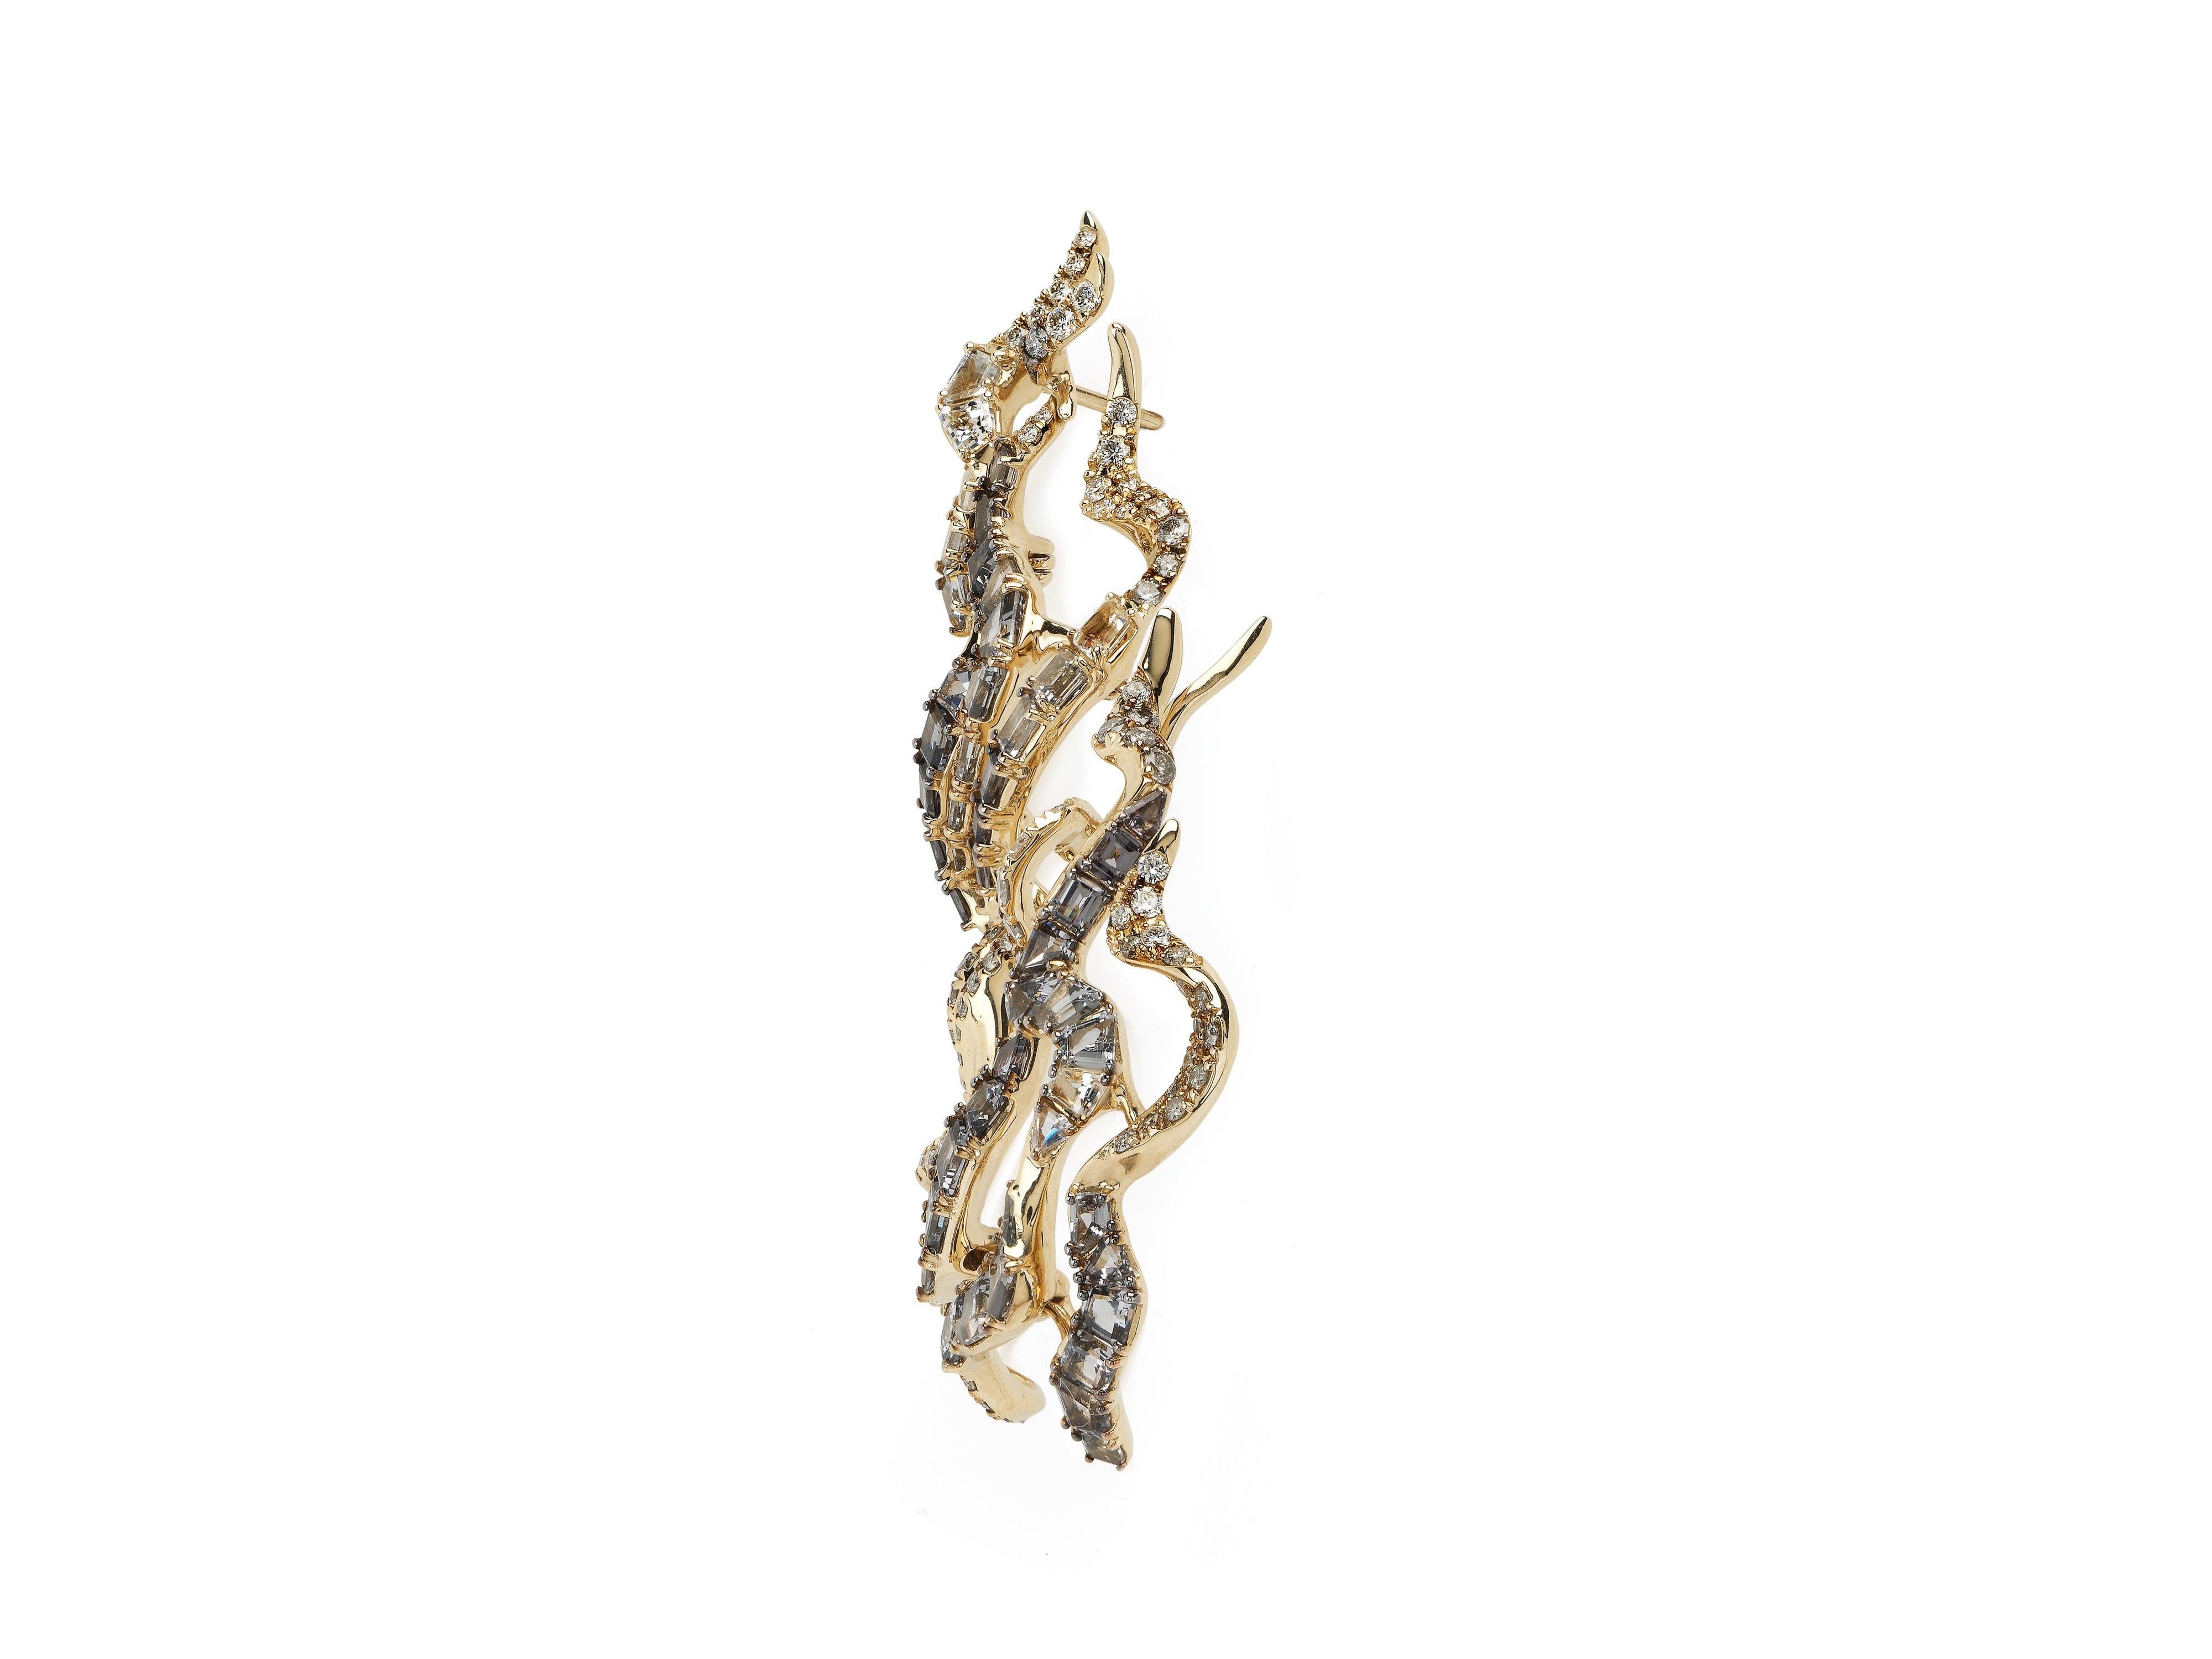 The Haze Earrings’ intricate, delicate design makes a striking statement. These drop earrings are composed of multiple ‘swirls’ connected by tiny hinges, so the earrings move with the wearer, conjuring the fluidity of an ever-changing haze of smoke.